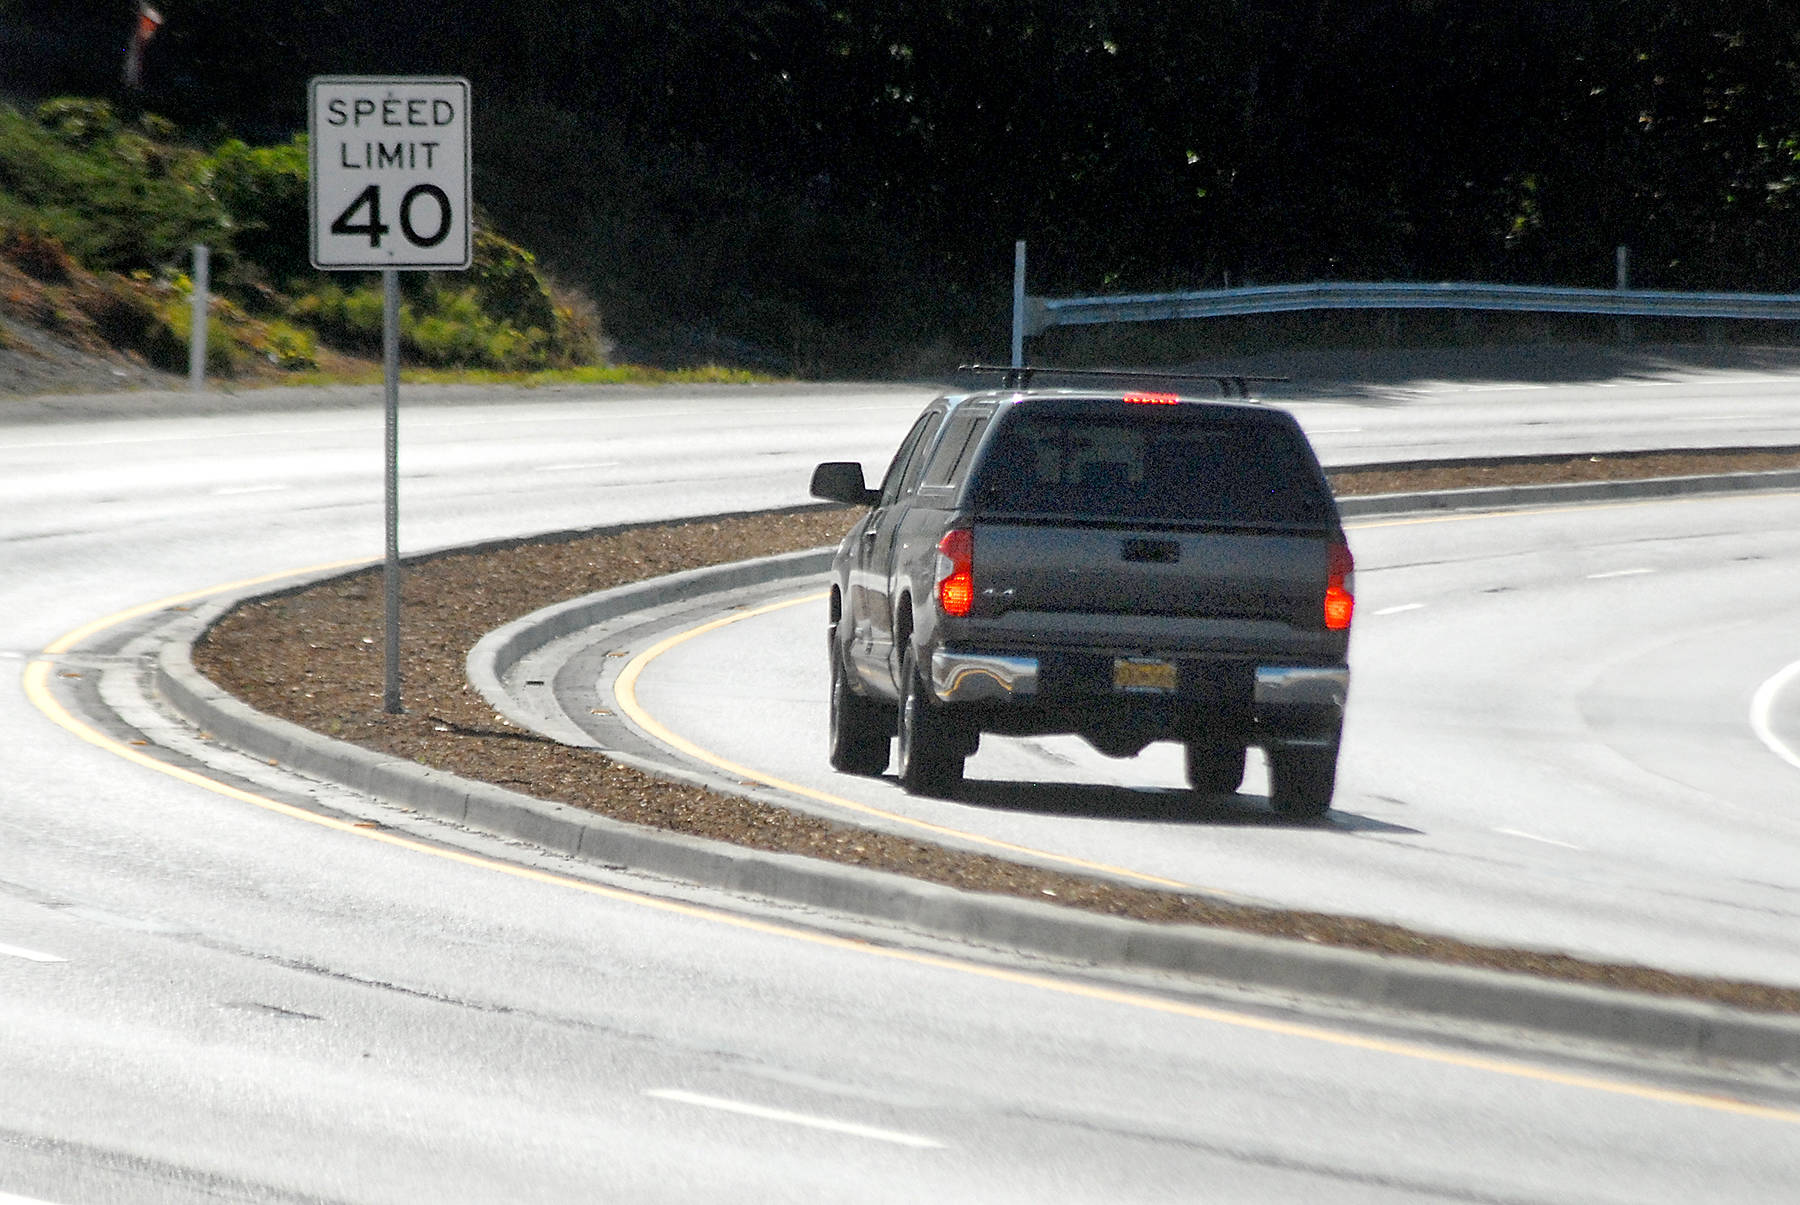 Keith Thorpe/Peninsula Daily News
A truck makes its way around a curve on a newly-divided section of U.S. Highway 101 on Saturday as the road descends into Morse Creek Valley east of Port Angeles.